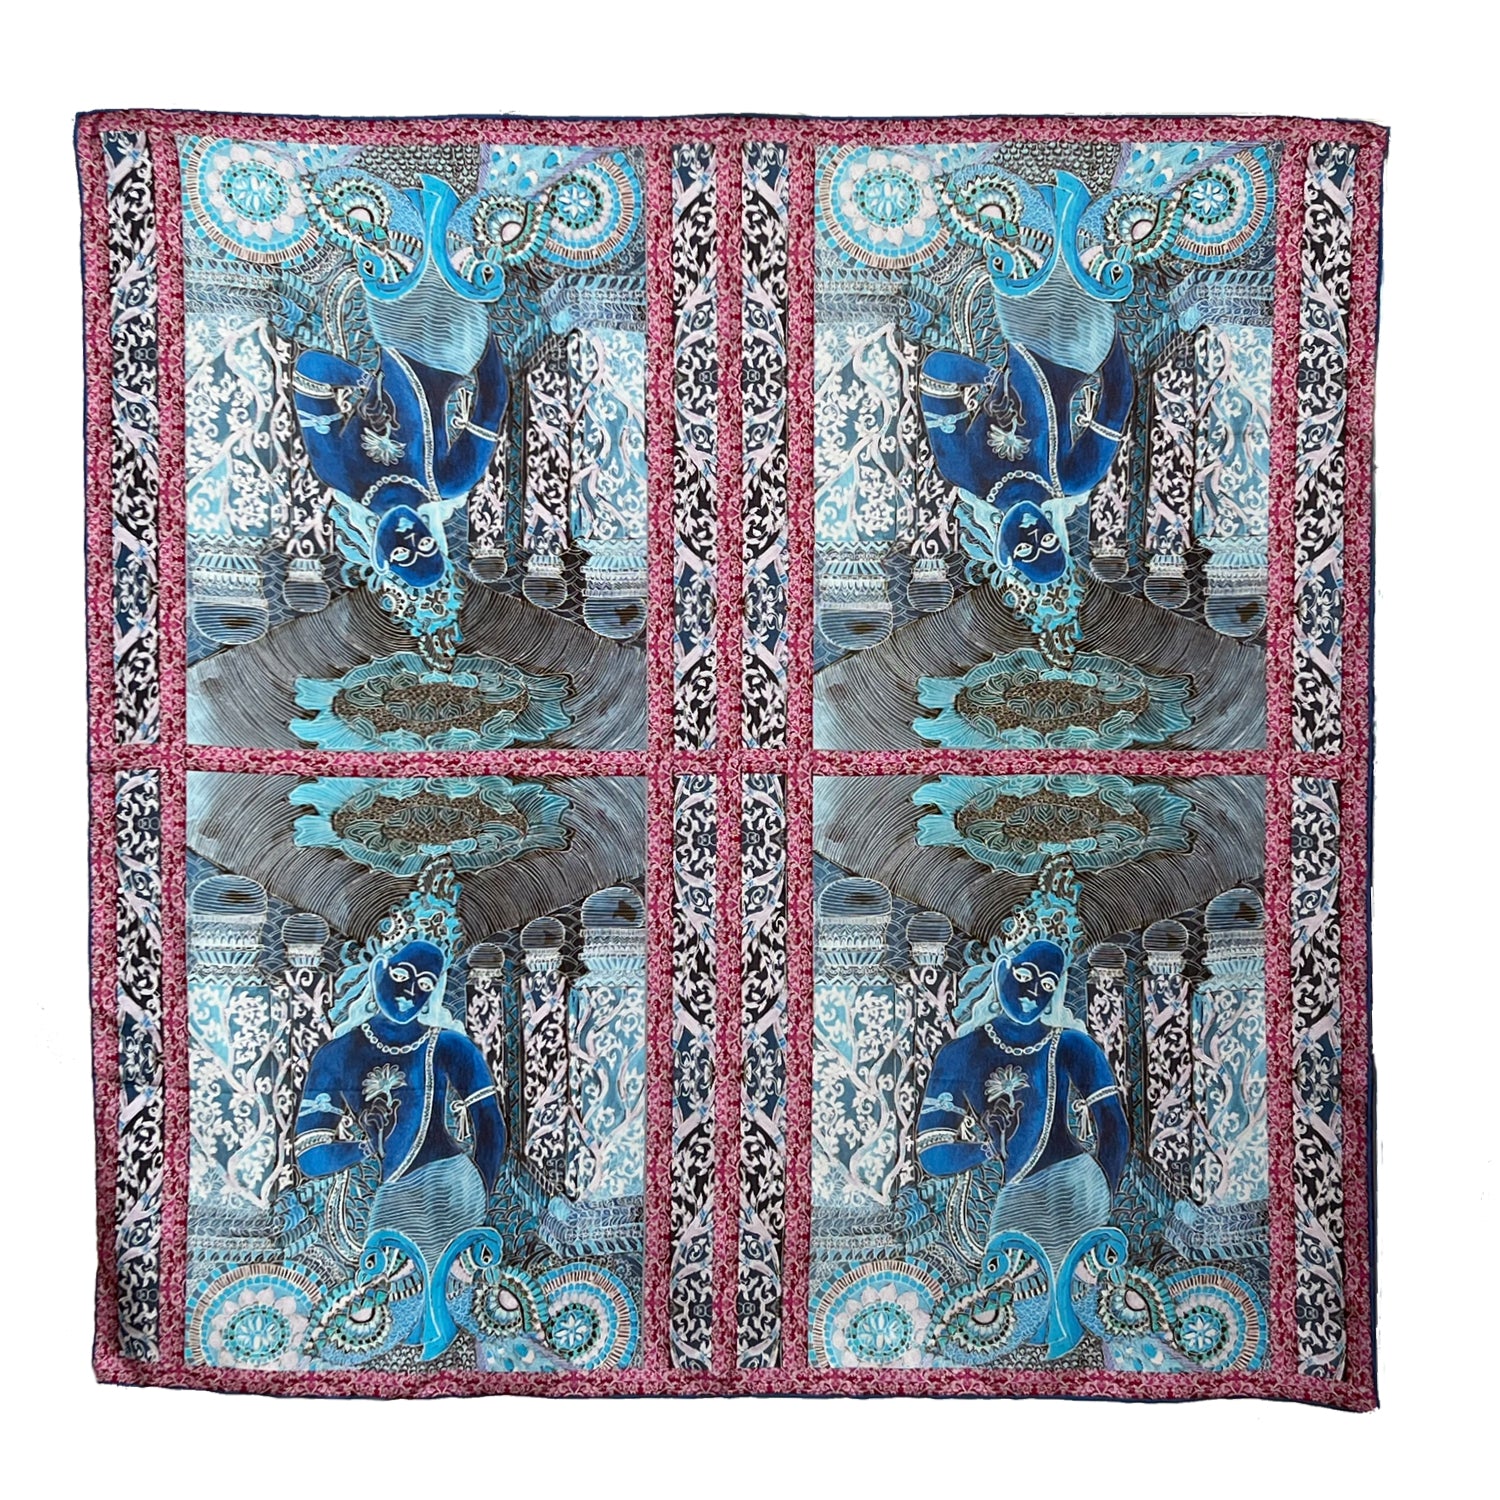 detail of silk scarf with blue and pink colors inspired by cave paintings of Ajanta in India. Chetna Singh Folklore collection